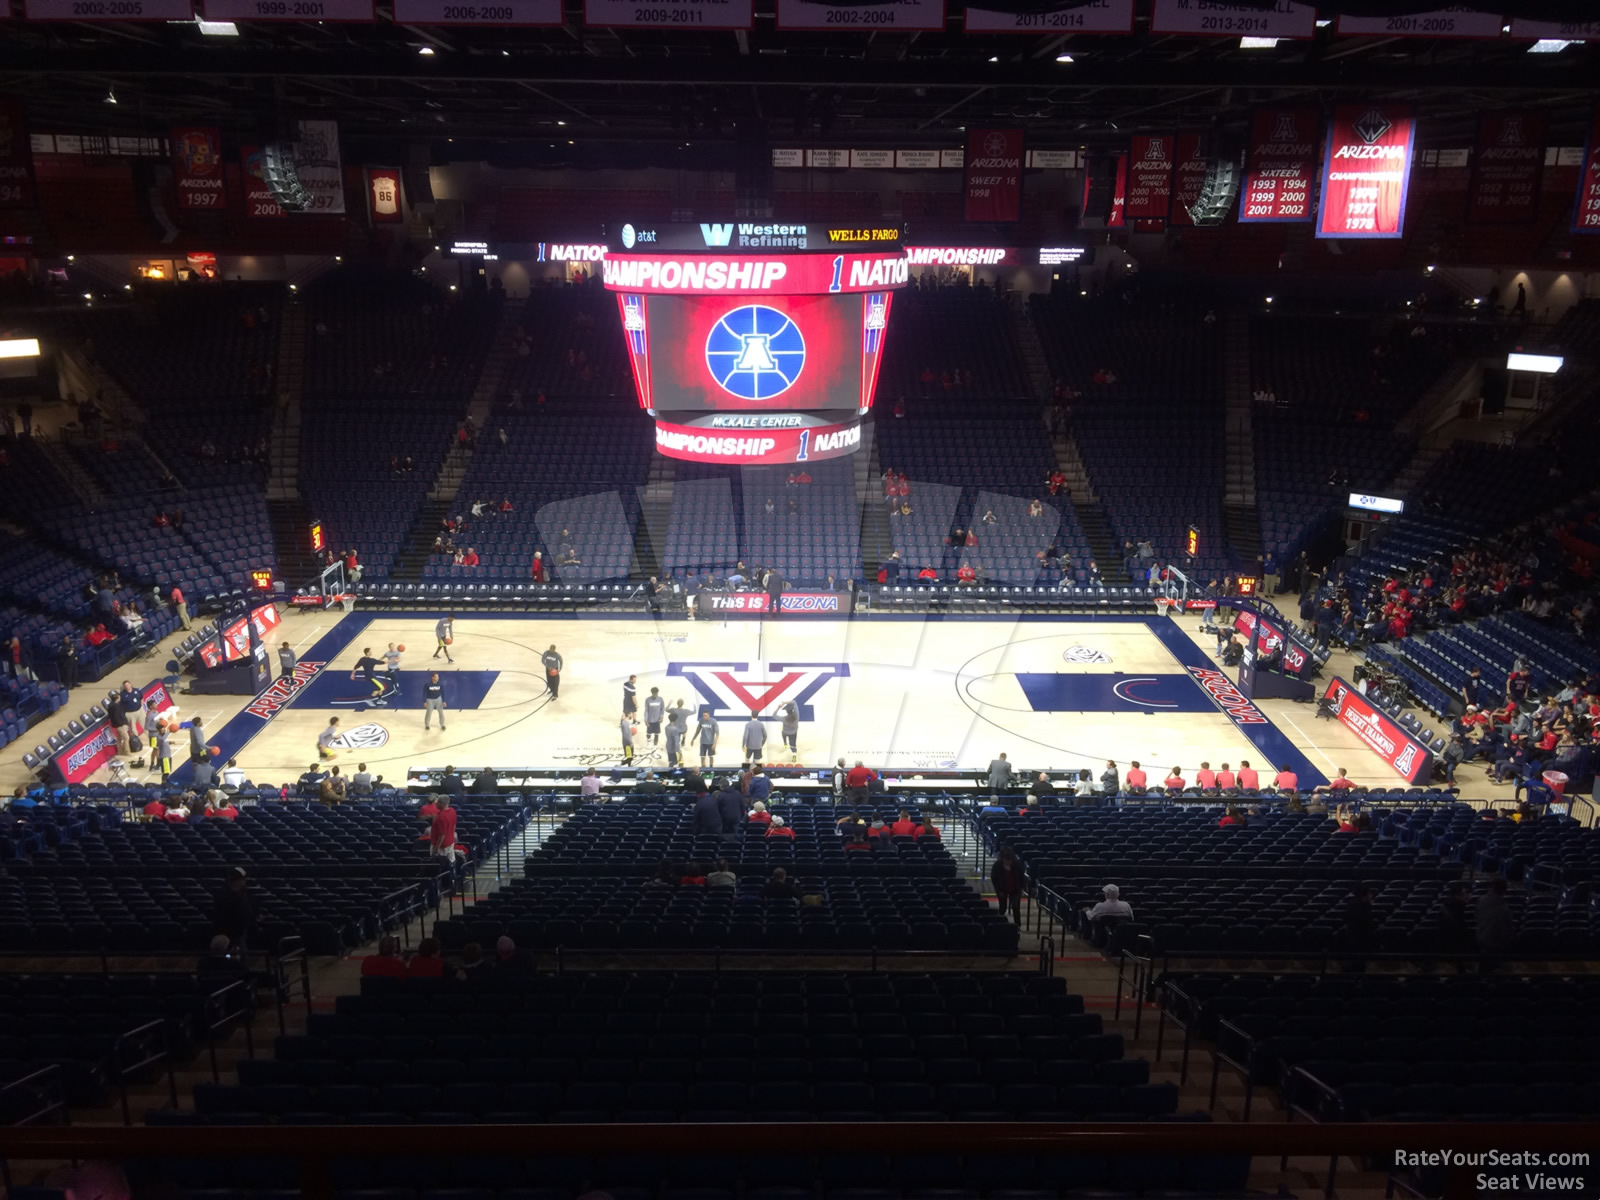 section 101b, row 35 seat view  - mckale center